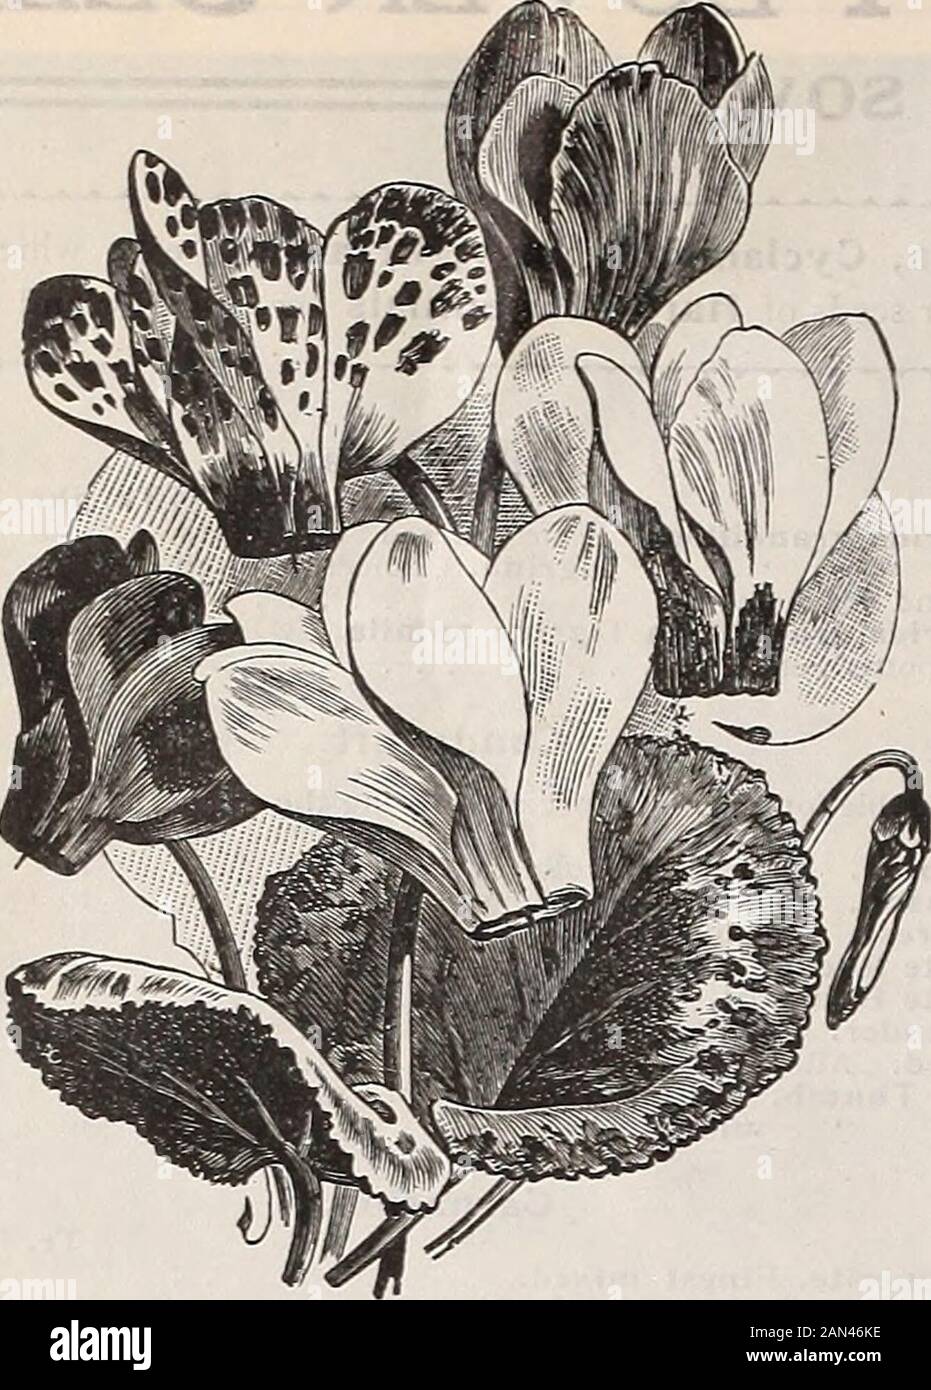 Dreer's wholesale price list 1906 : bulbs plants seasonable flower seeds and vegetable seeds grass seeds fertilizers, tools, etc., etc . CINERARIA—DREERS PRIZE DWARF HENRY A. DEEEE, 714 Chestnut Street, Philadelphia.. CYCLAMEN PERSICUM GIGANTEUM Cyclamen. Our entire stock of these are grown for us by one of the best growers in Europe. They have given the best of satisfaction in .the pastand we feel sure will continue to do so.   , «3£E-3 Tr- Pkt- °z- Persicum, finest mixed, Easier to grow than ^nteum ,oo 4° 1?00°0 seeds seeds giganteum, white - ? • • 5° 75 $6 oo • white with carmine eye . 6 oo Stock Photo